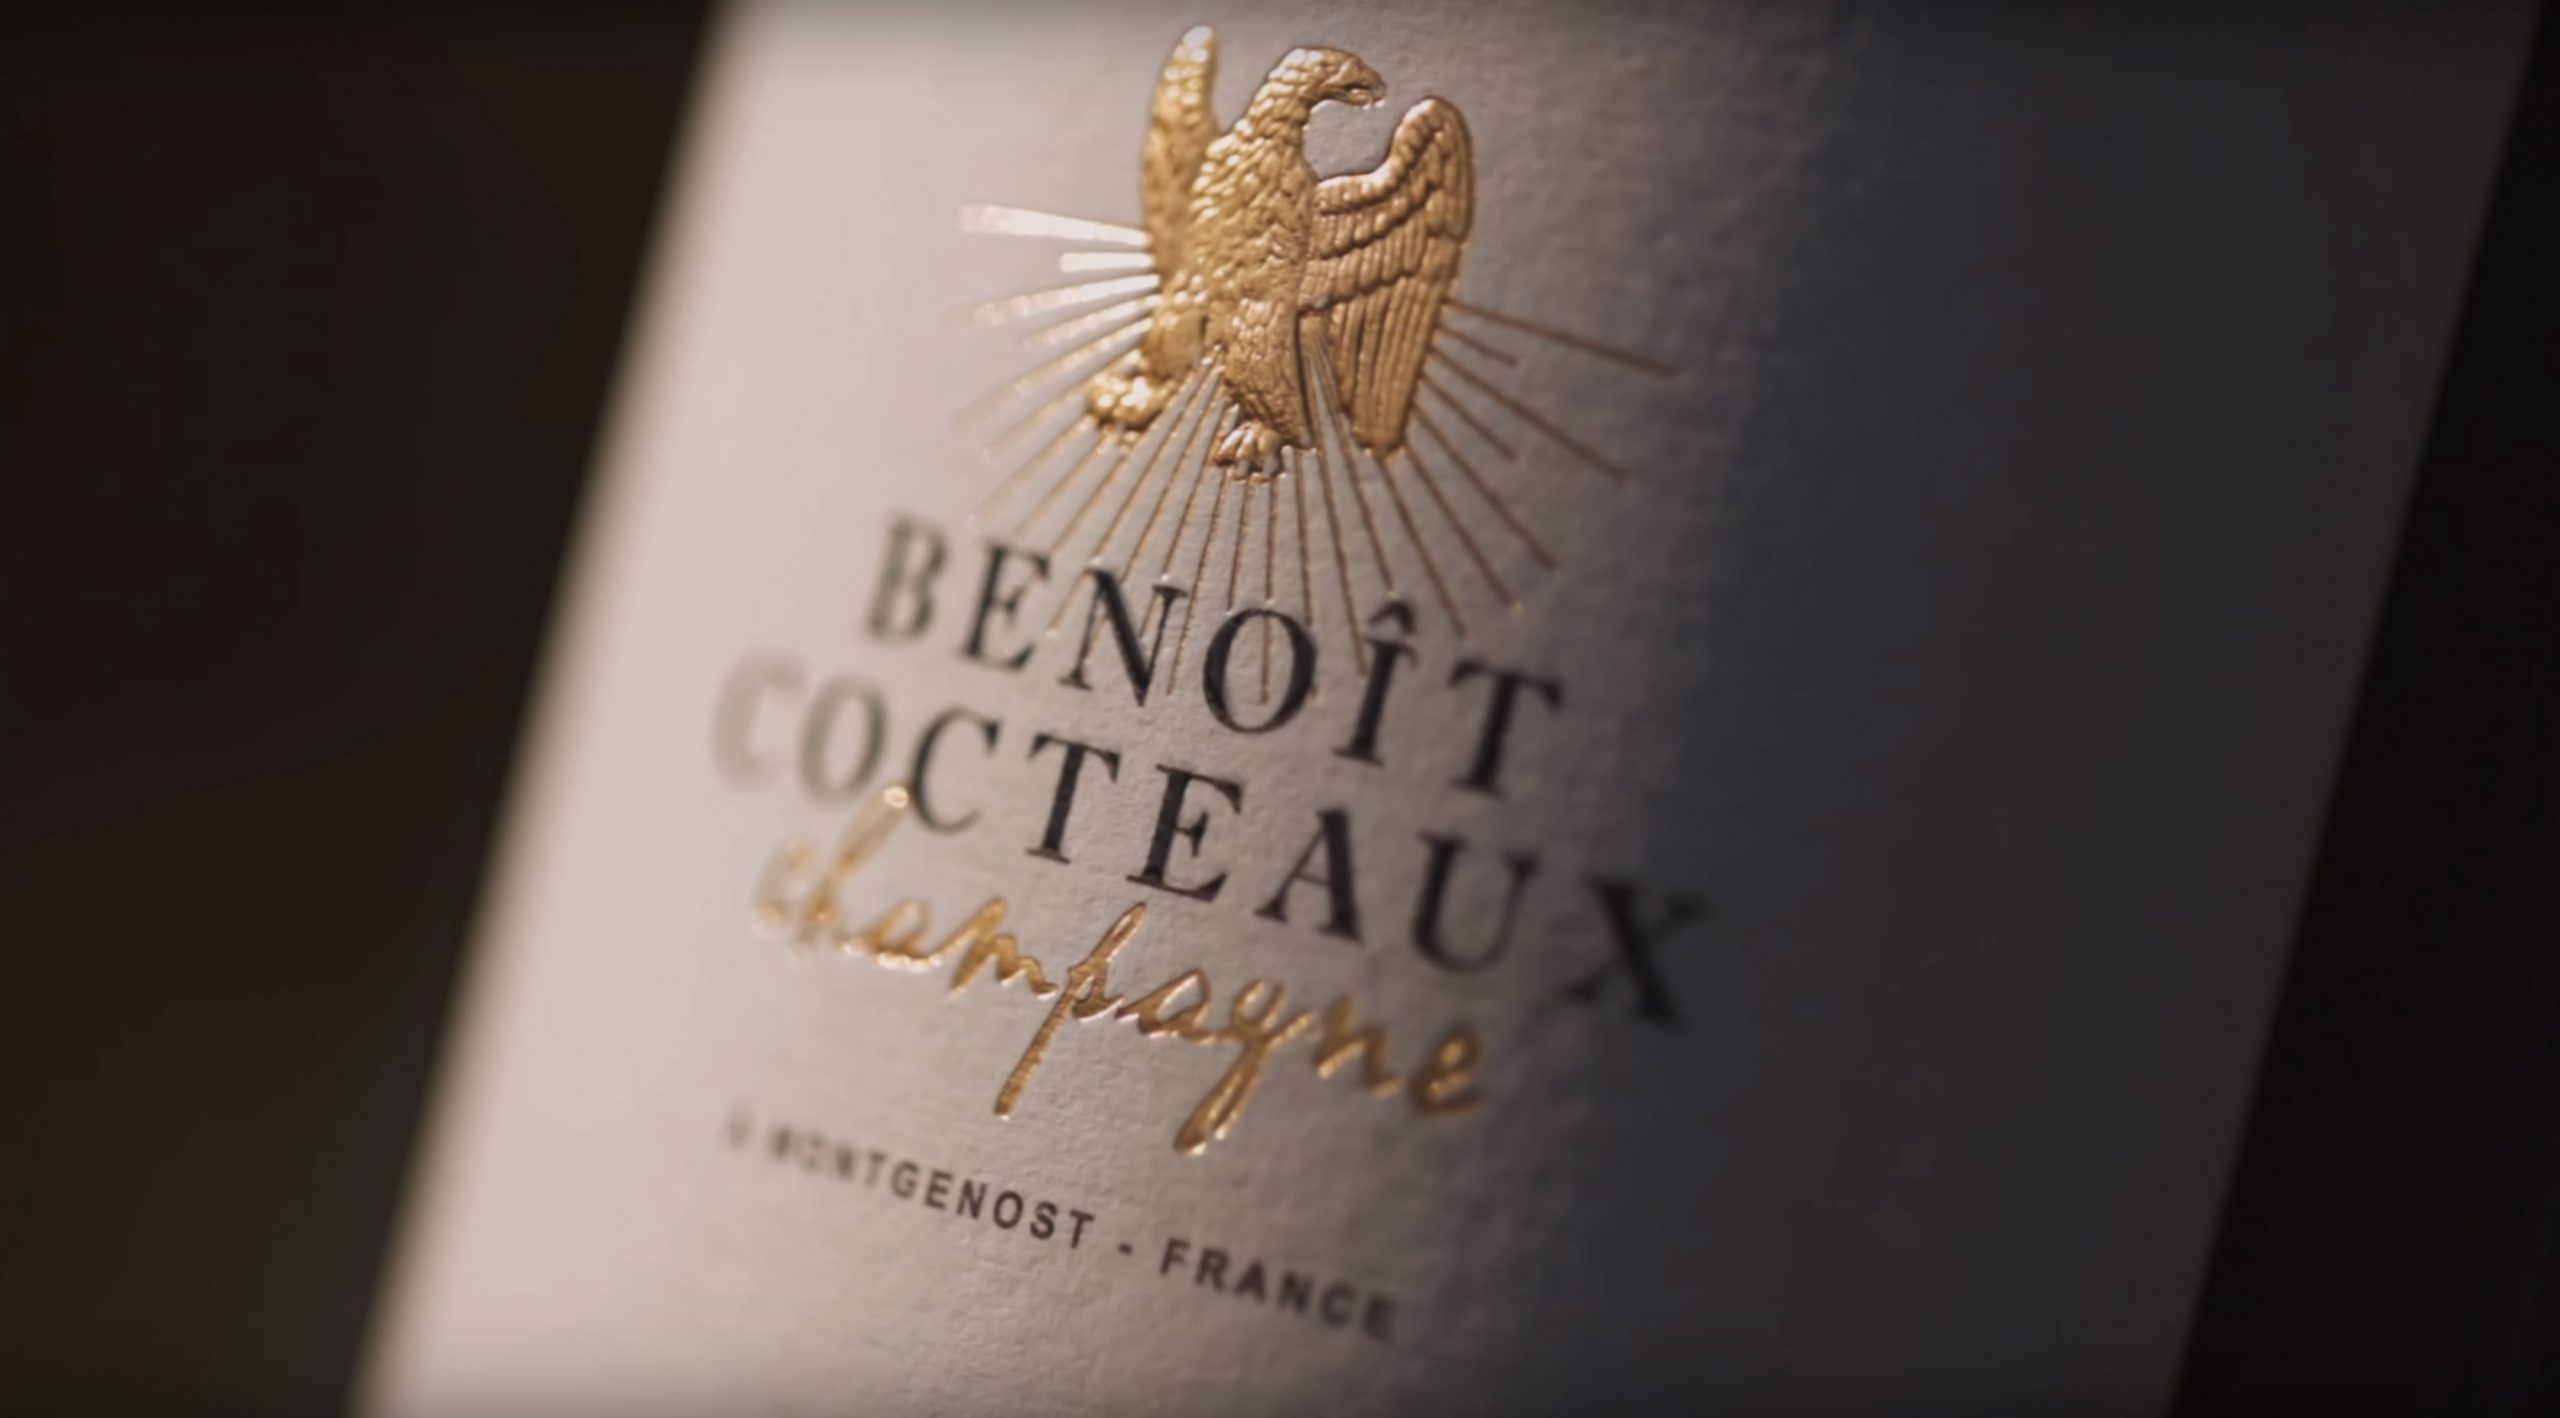 Champagne-Benoît-Cocteaux-Film-promotionnel-5-Agence-Discovery-scaled